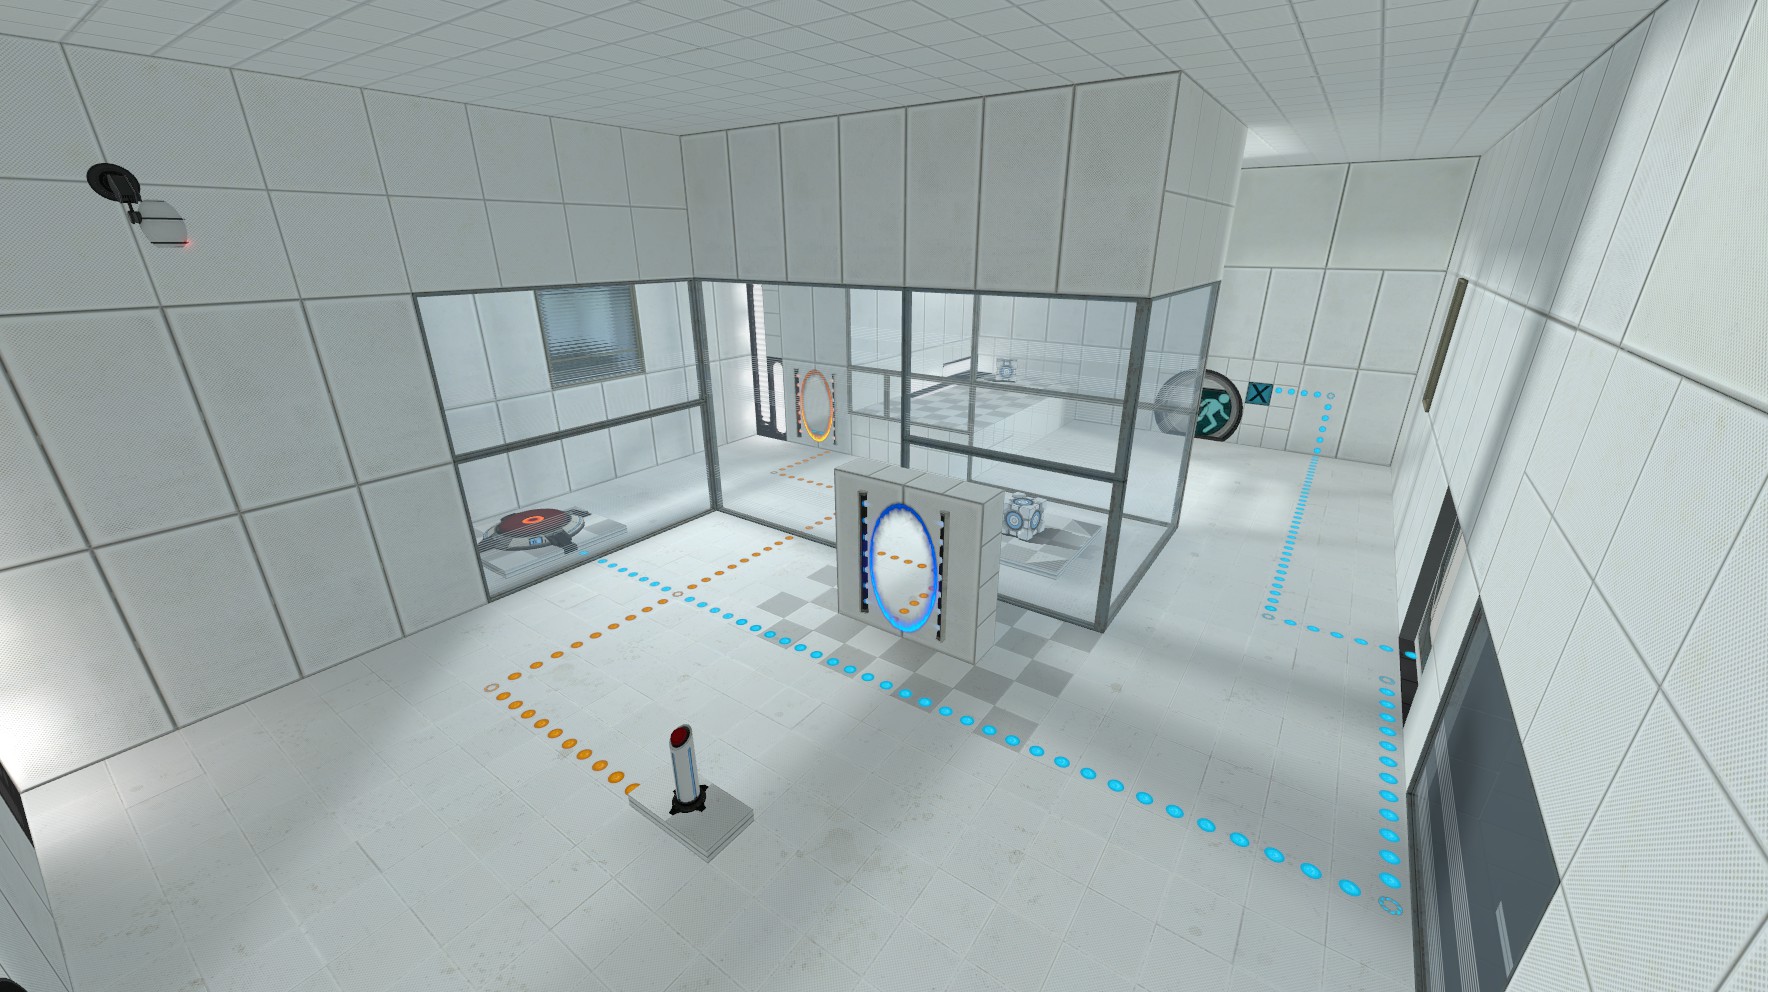 Second testchamber image - The MARTI Initiative mod for Portal 2.